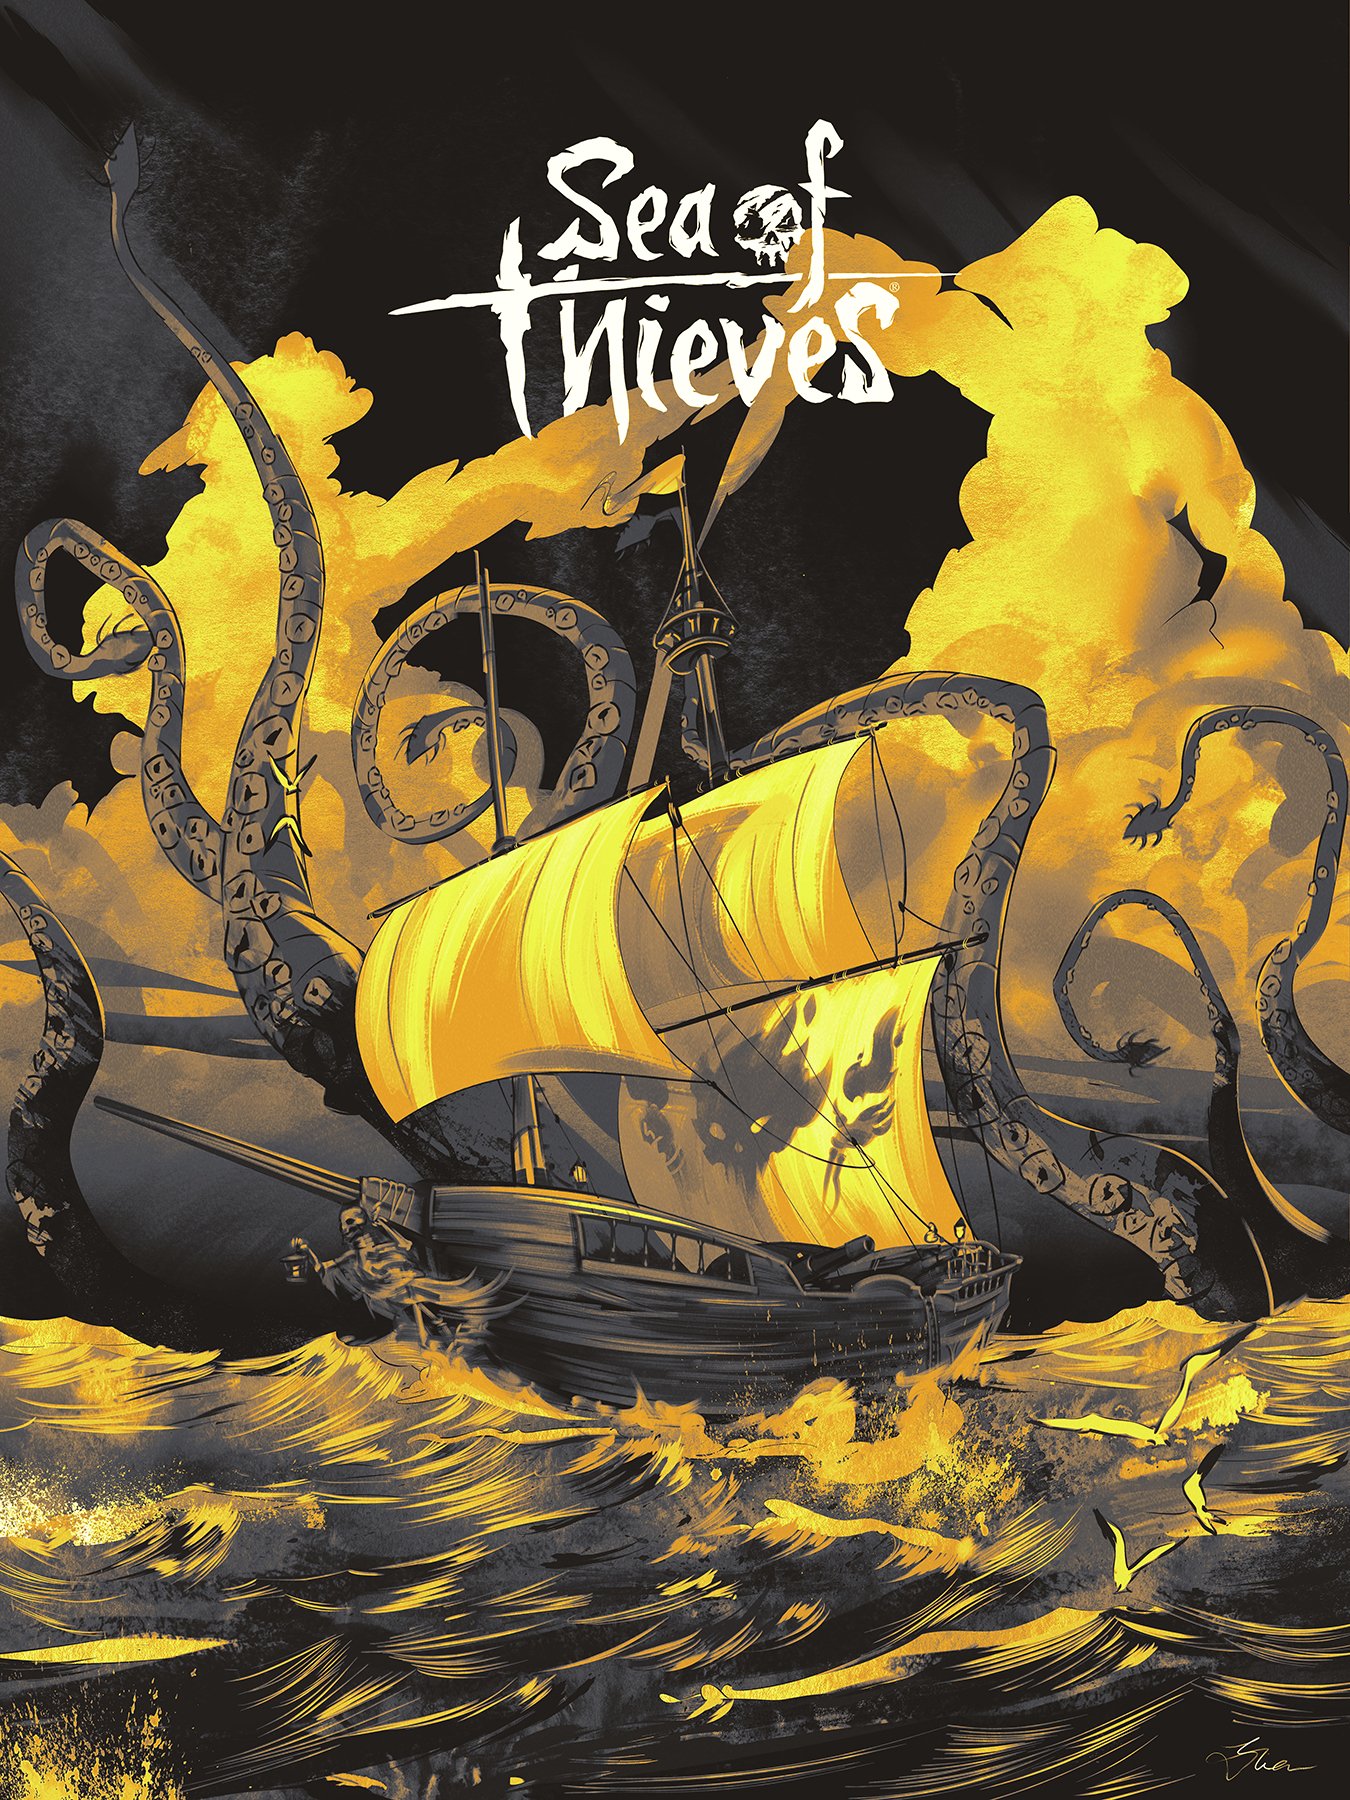   Sea of Thieves - Fifth Anniversary Art   Client: Microsoft/Rare Limited (official art) 